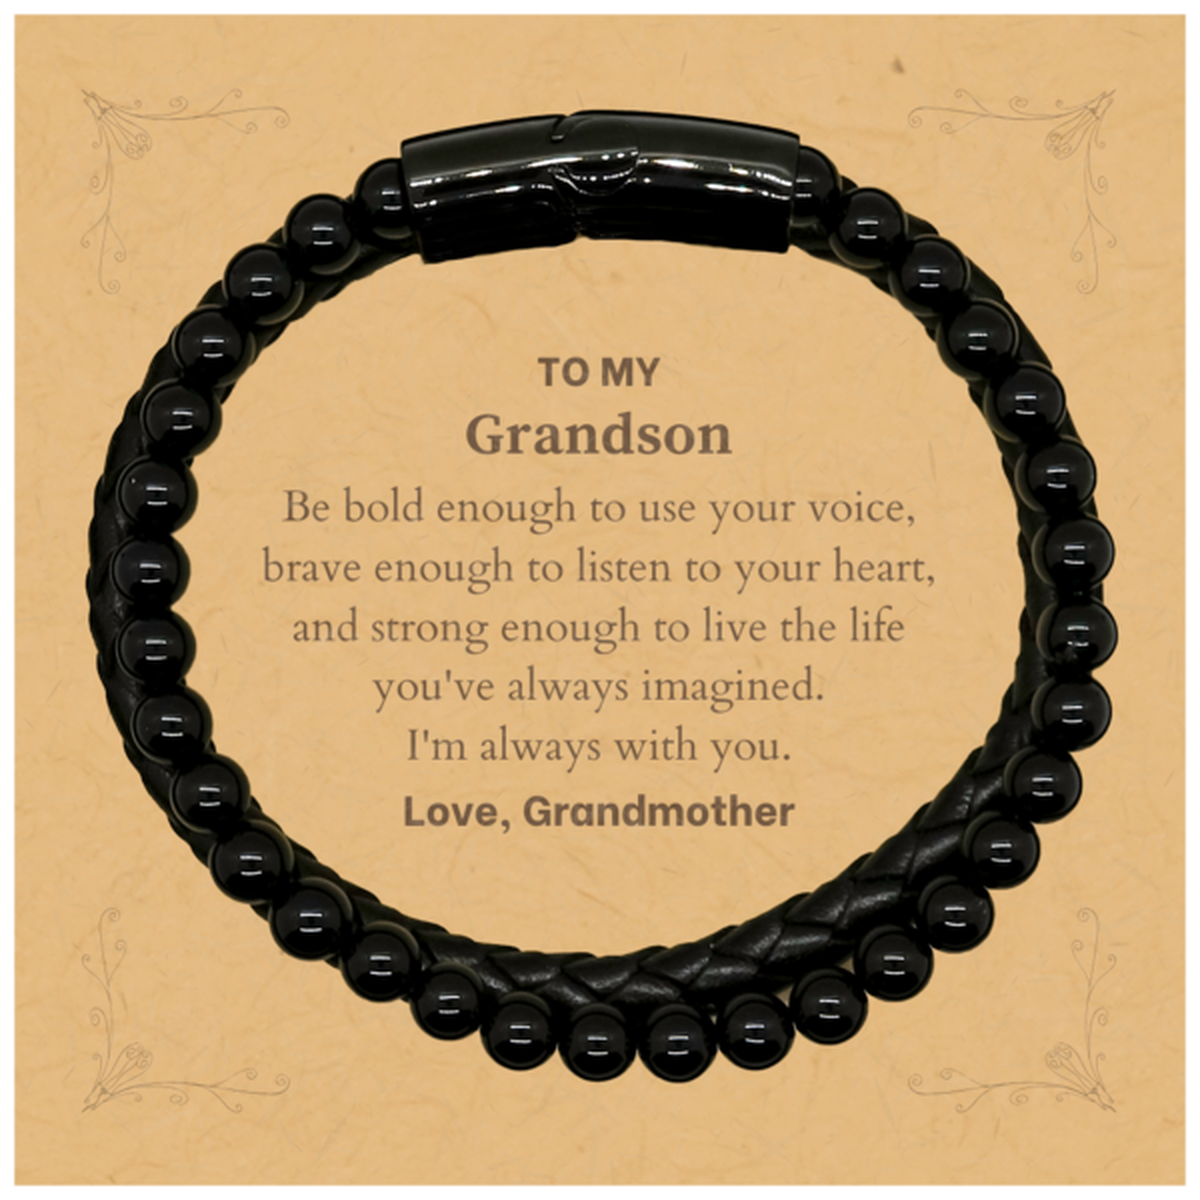 Keepsake Grandson Stone Leather Bracelets Gift Idea Graduation Christmas Birthday Grandson from Grandmother, Grandson Be bold enough to use your voice, brave enough to listen to your heart. Love, Grandmother